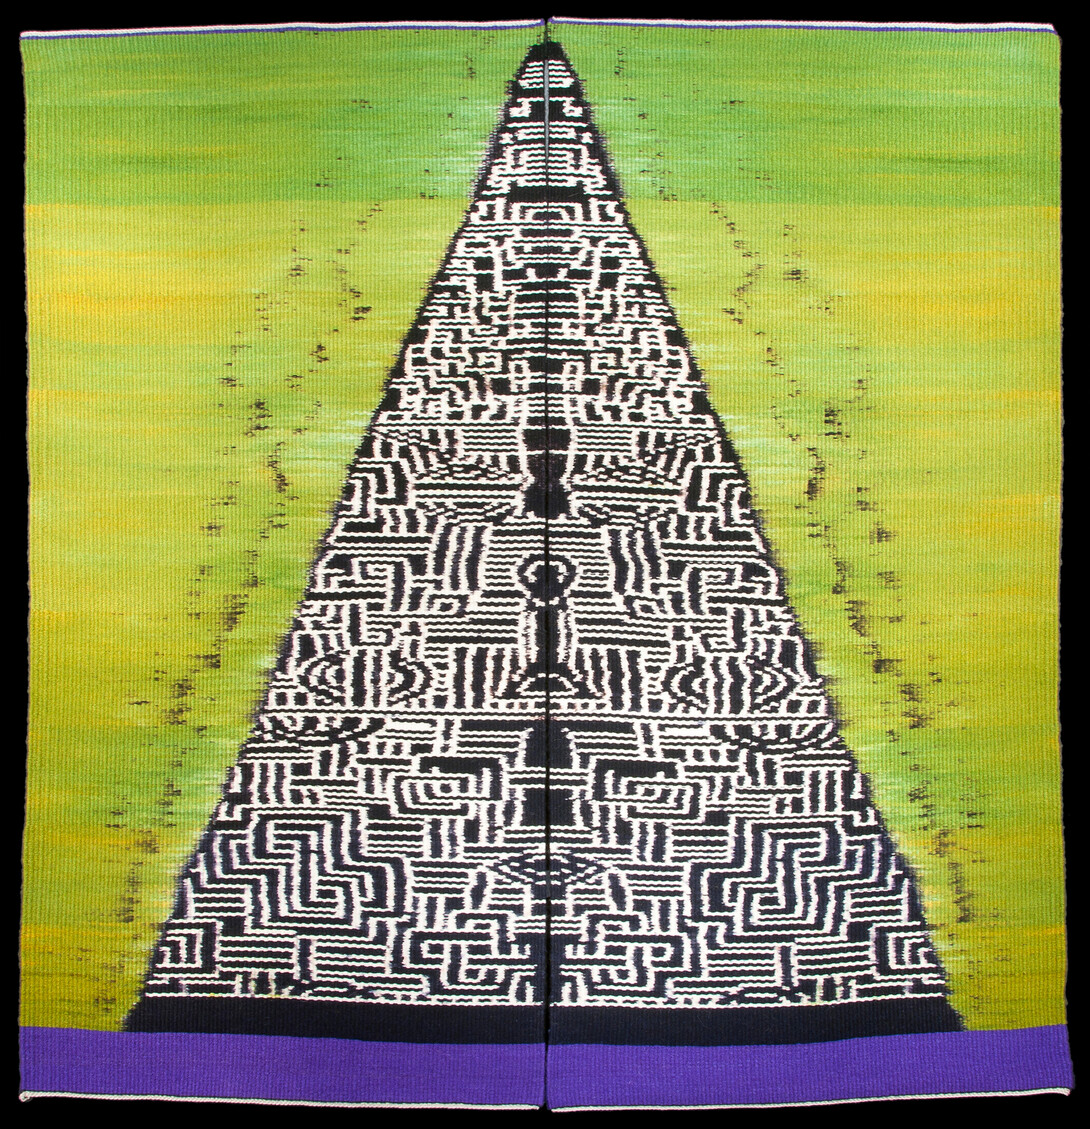 "Mountain for Buddha — Envy," a weft-faced ikat tapestry (wrapped, dyed and woven wool on linen warp) made by Mary Zicafoose.